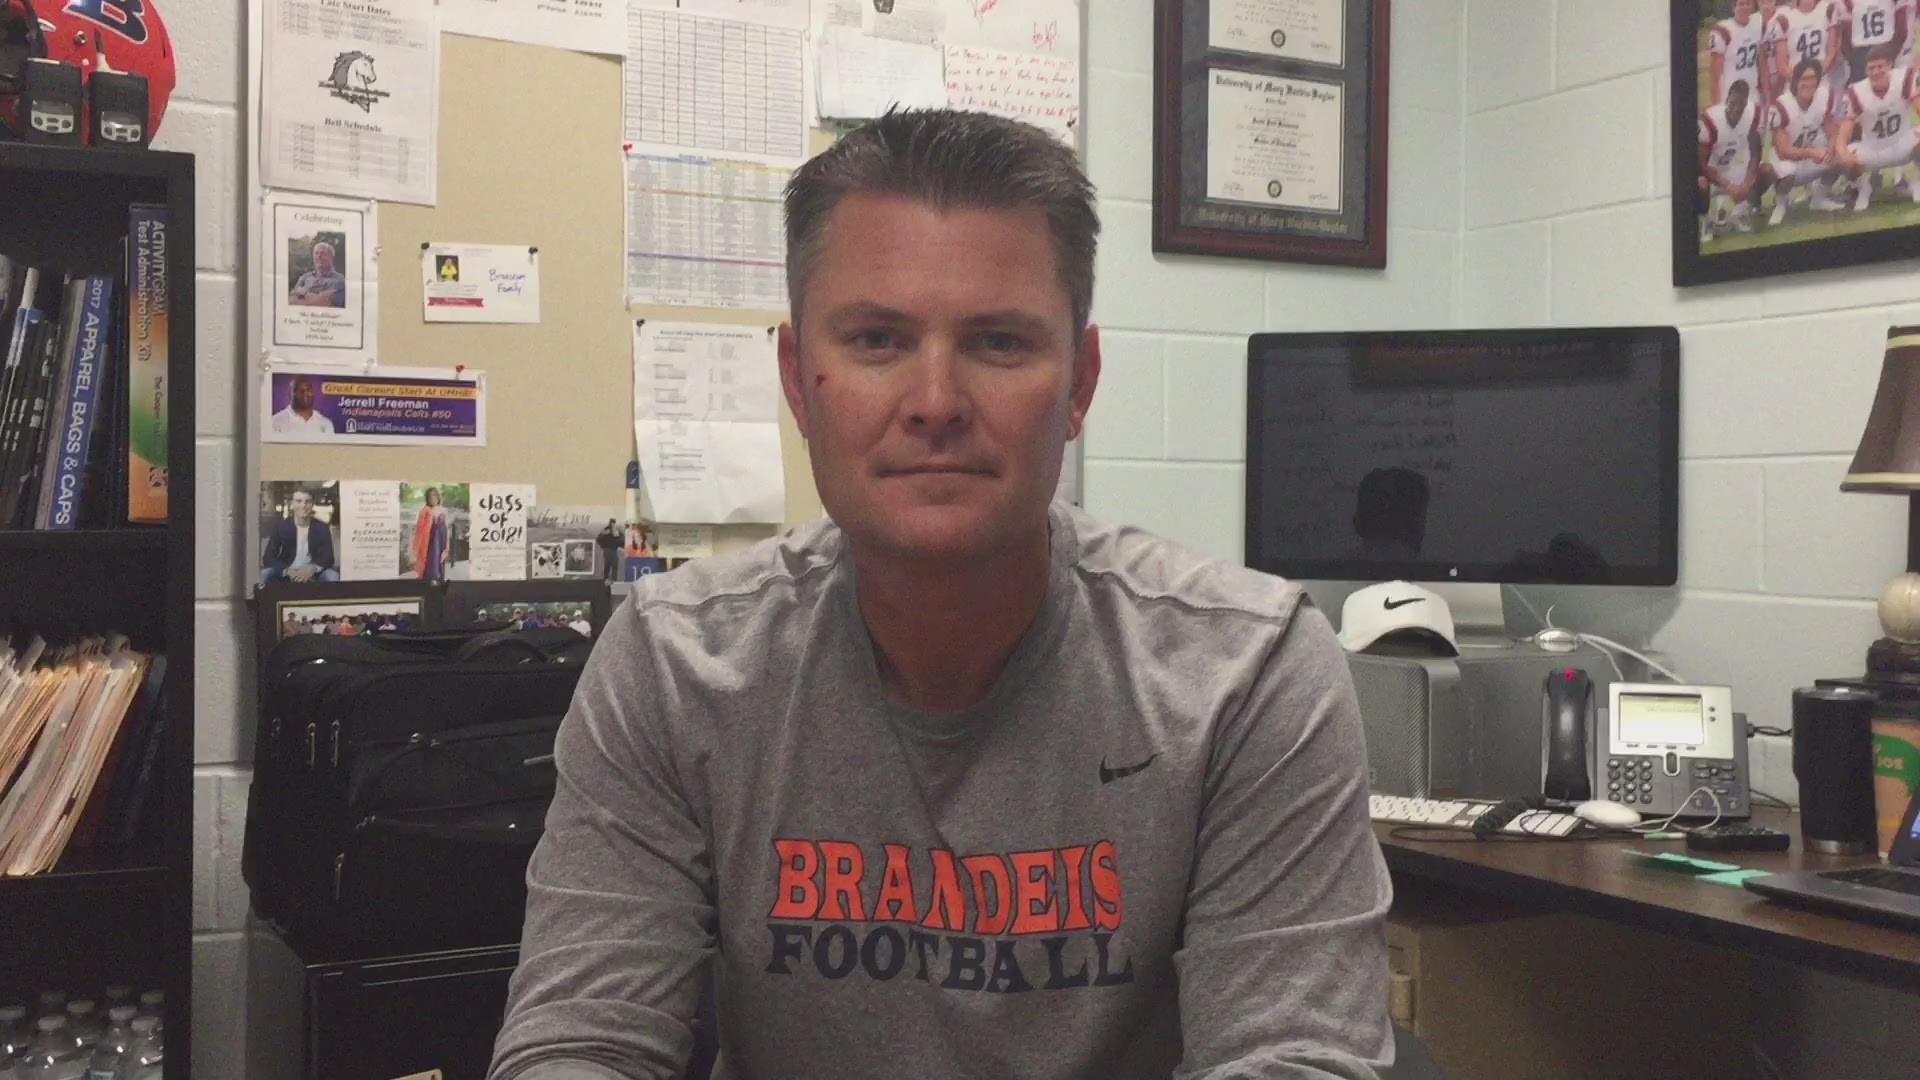 Brandeis coach David Branscom on the Broncos' commitment to return to the playoffs